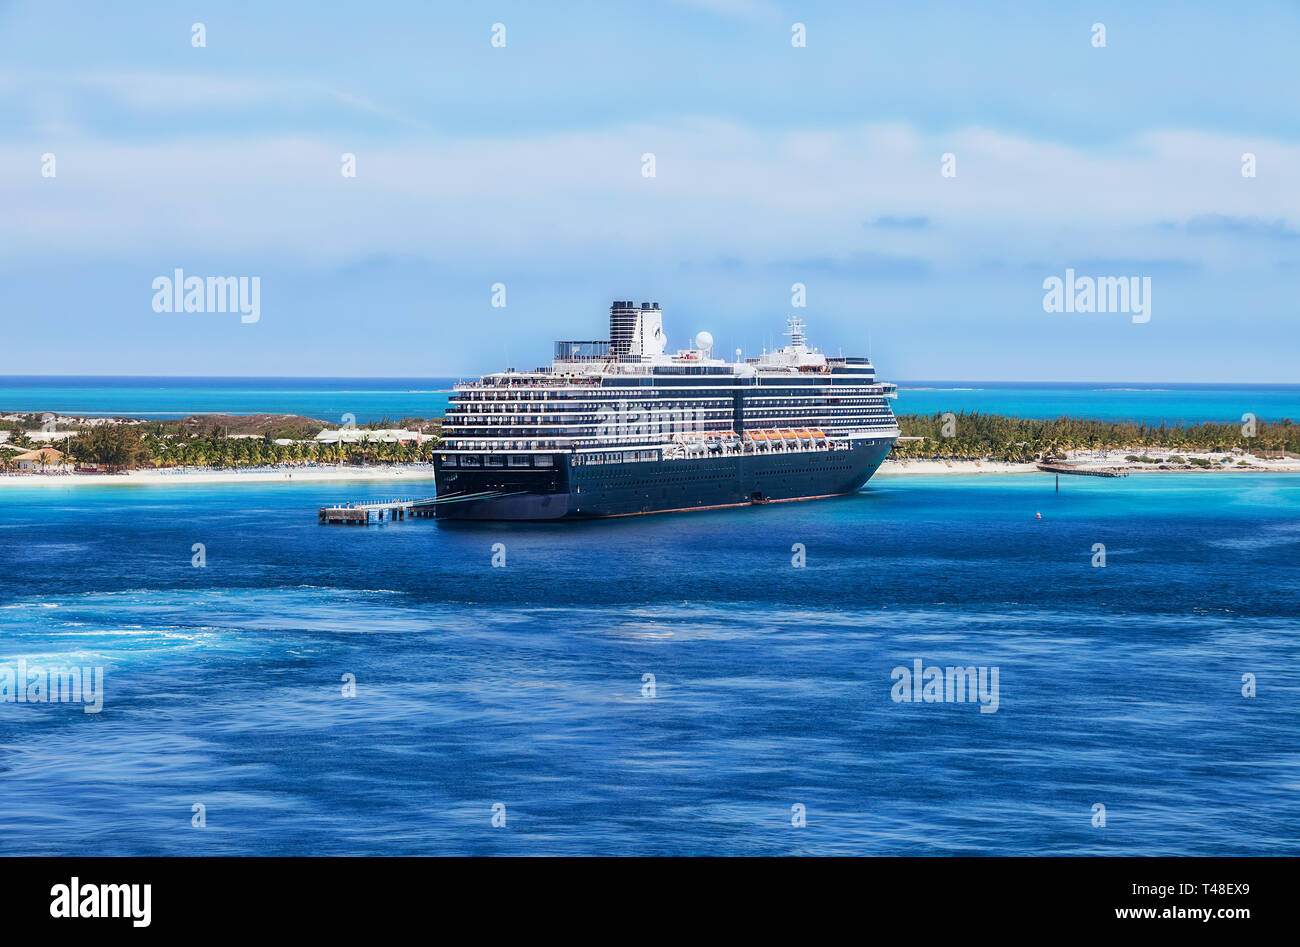 A cruise ship anchored on the beach of Grand Turk. Stock Photo